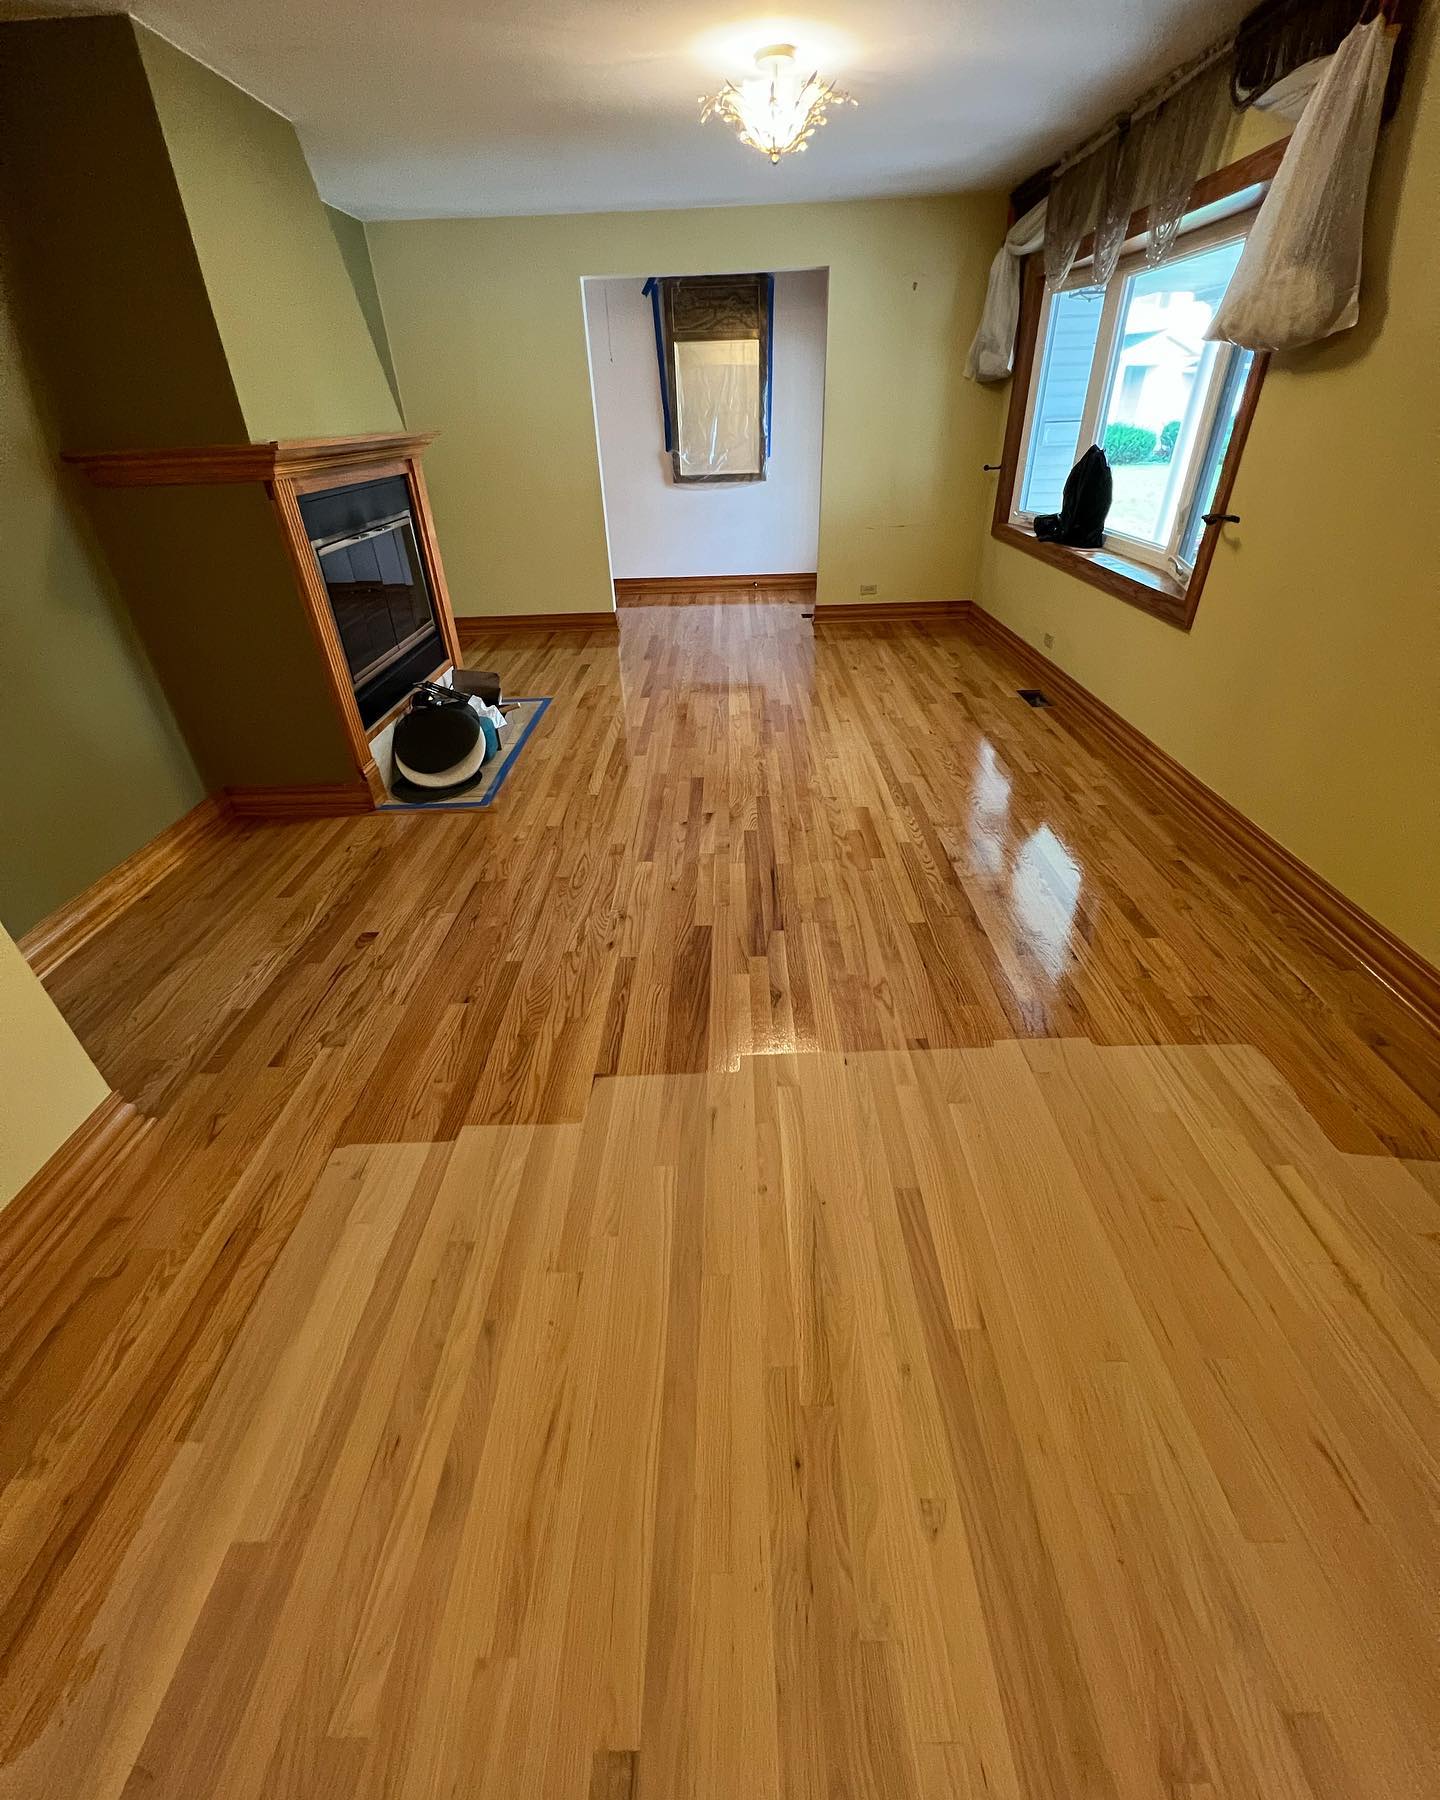 A long view of a room with newly refinished hardwood flooring in Philadelphia, displaying the tenth project's glossy surface and light wood tones against a backdrop of olive walls and traditional decor. The floor's reflection adds depth to the well-lit, serene space.